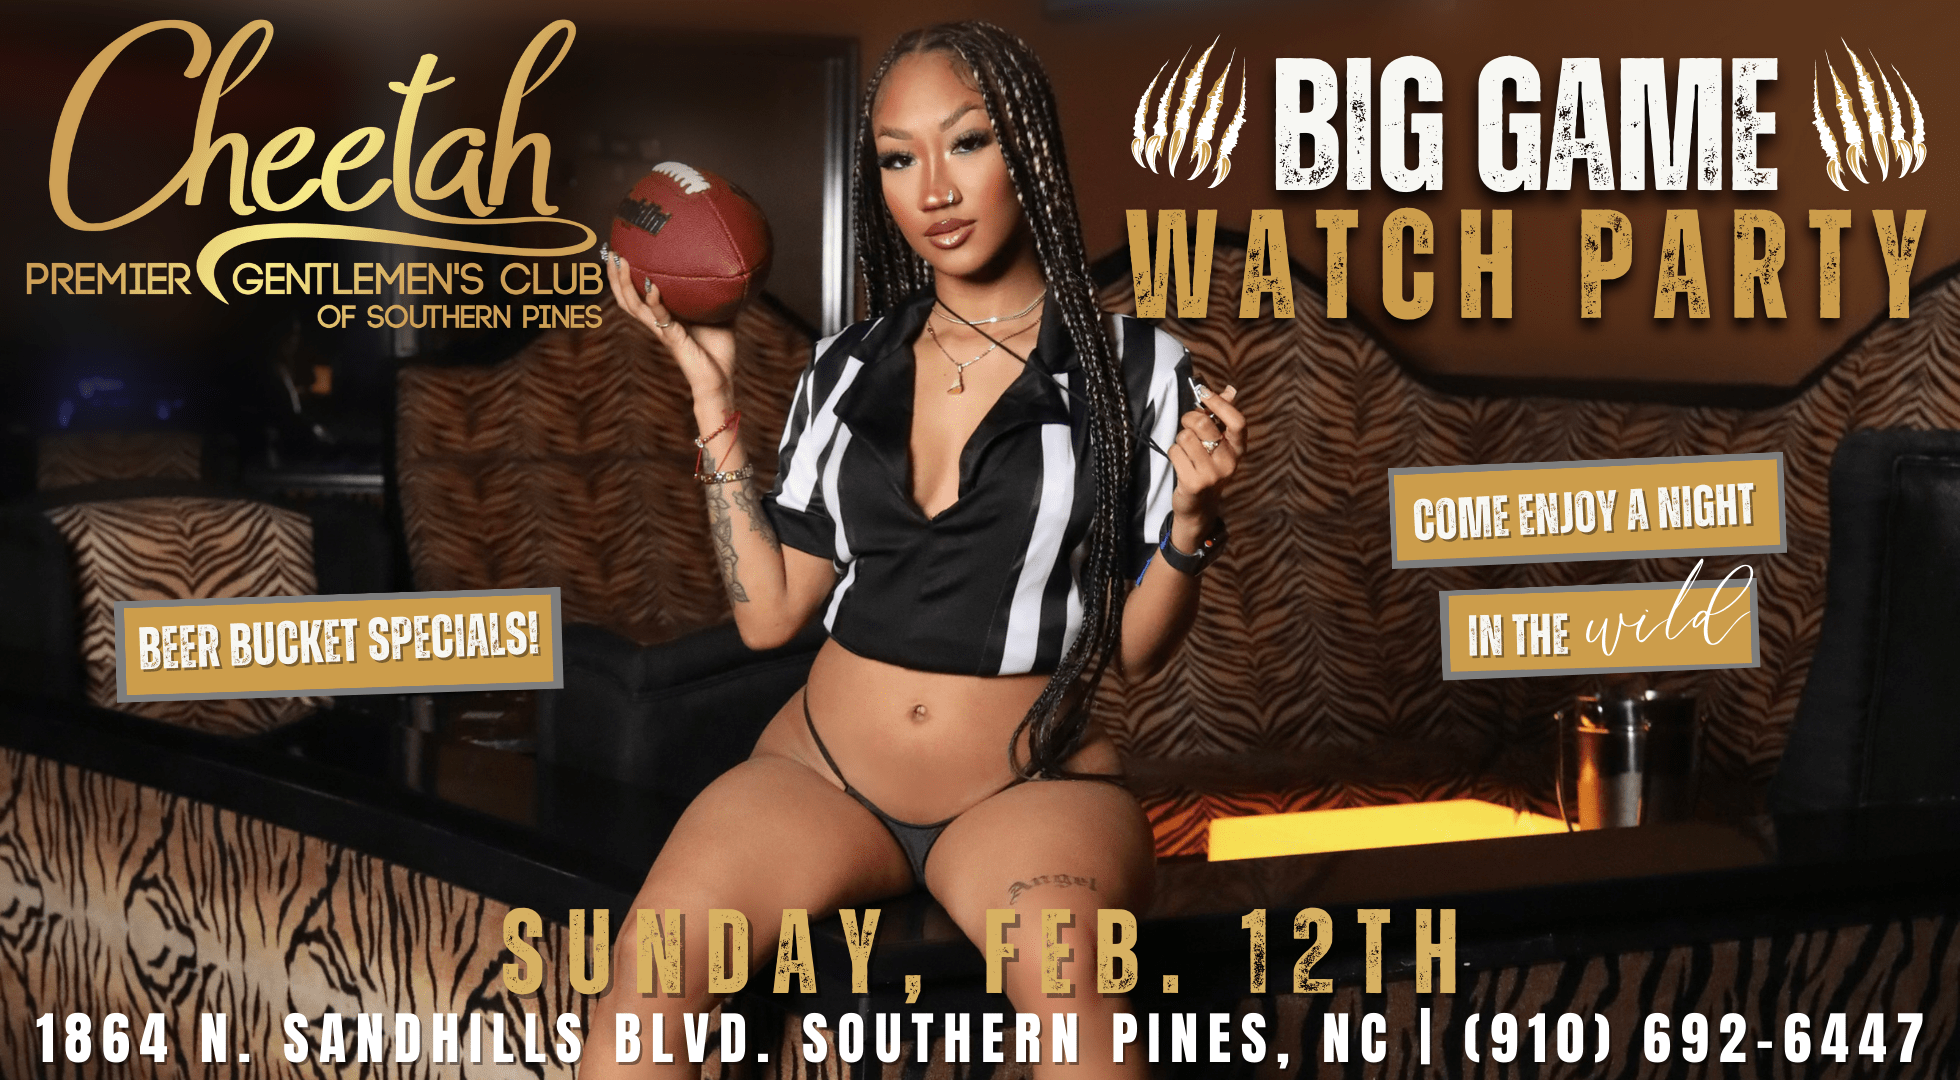 Superbowl Big Game Watch Party